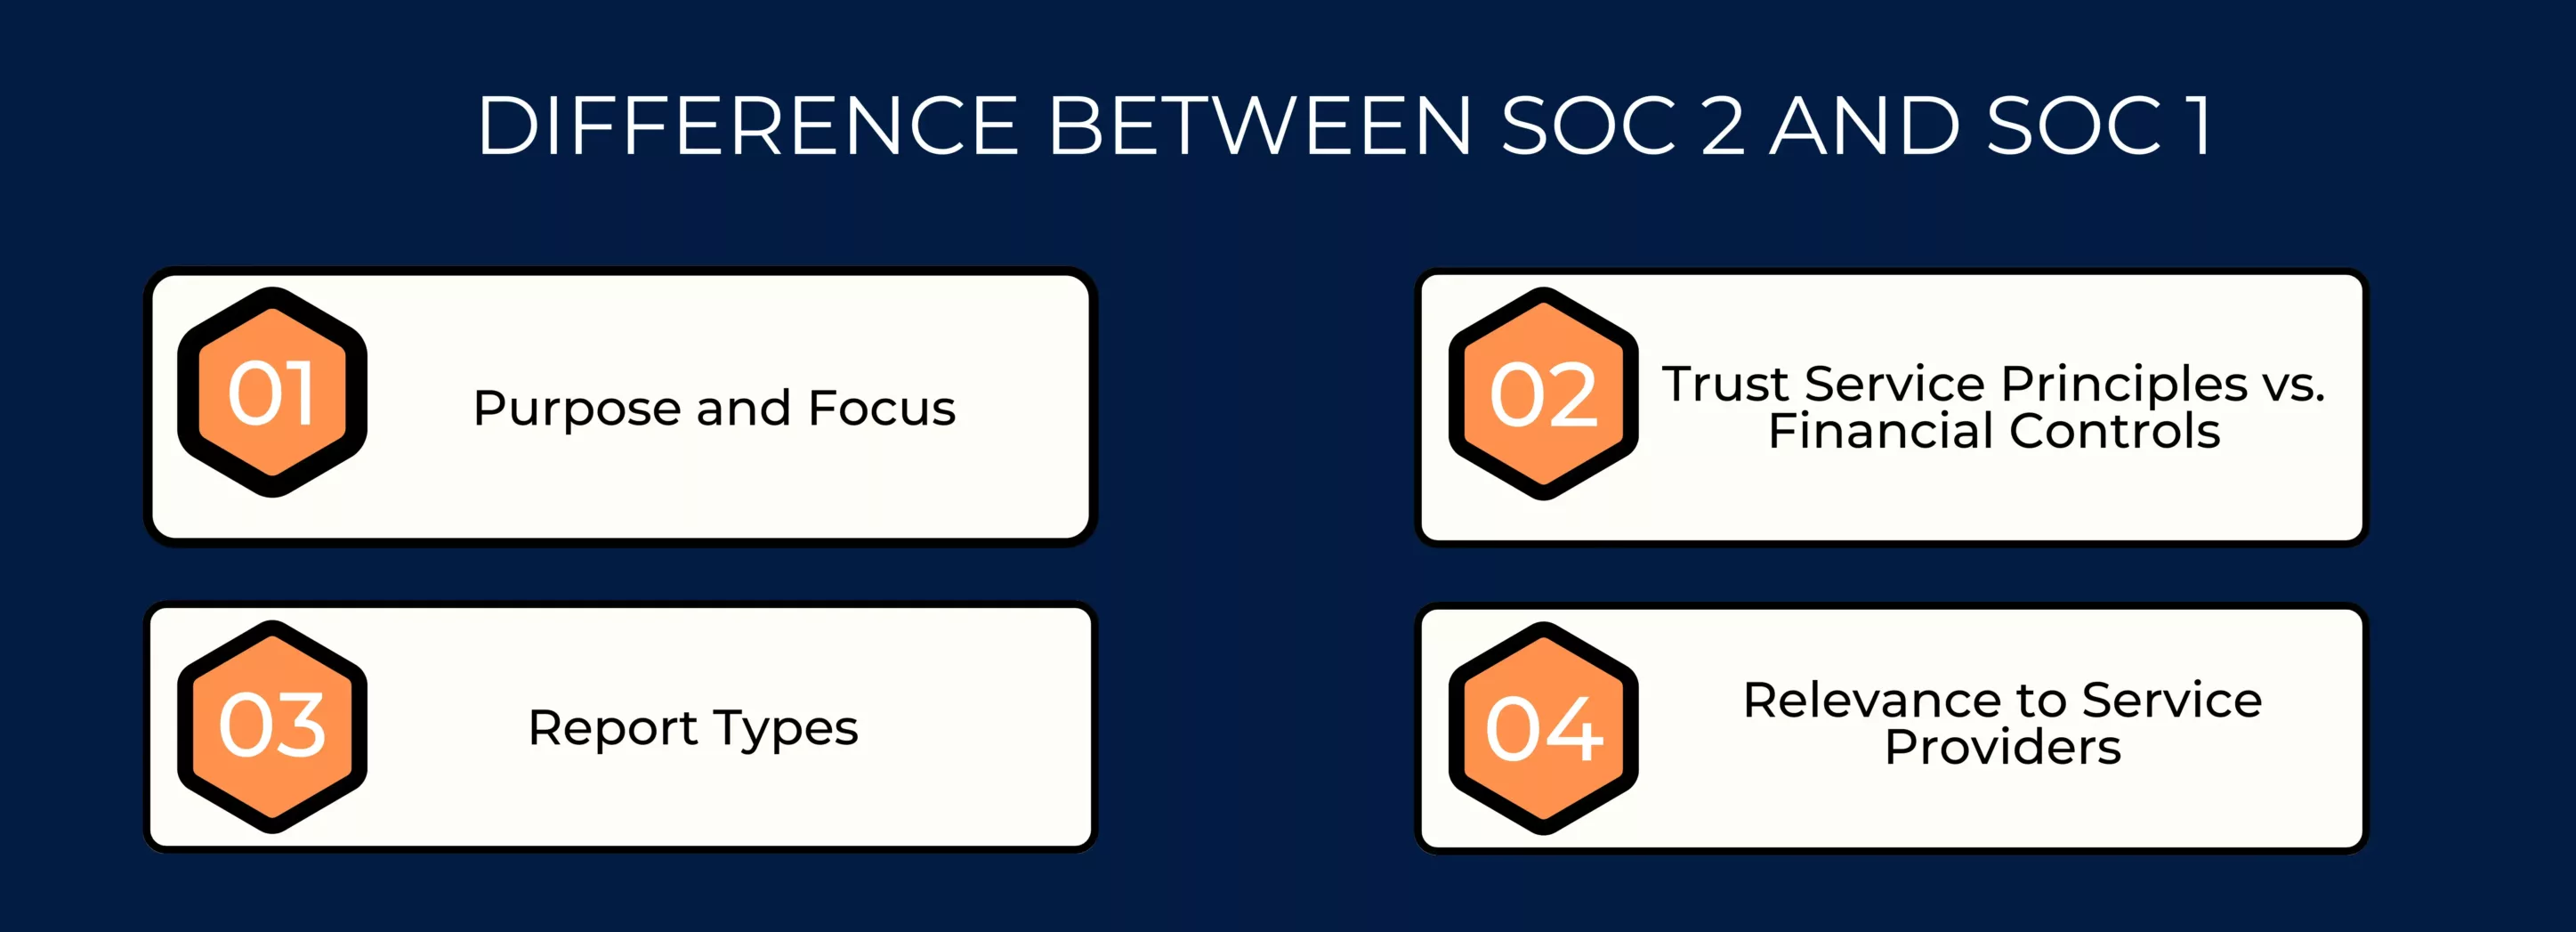 Difference of SOC 2 and SOC 1